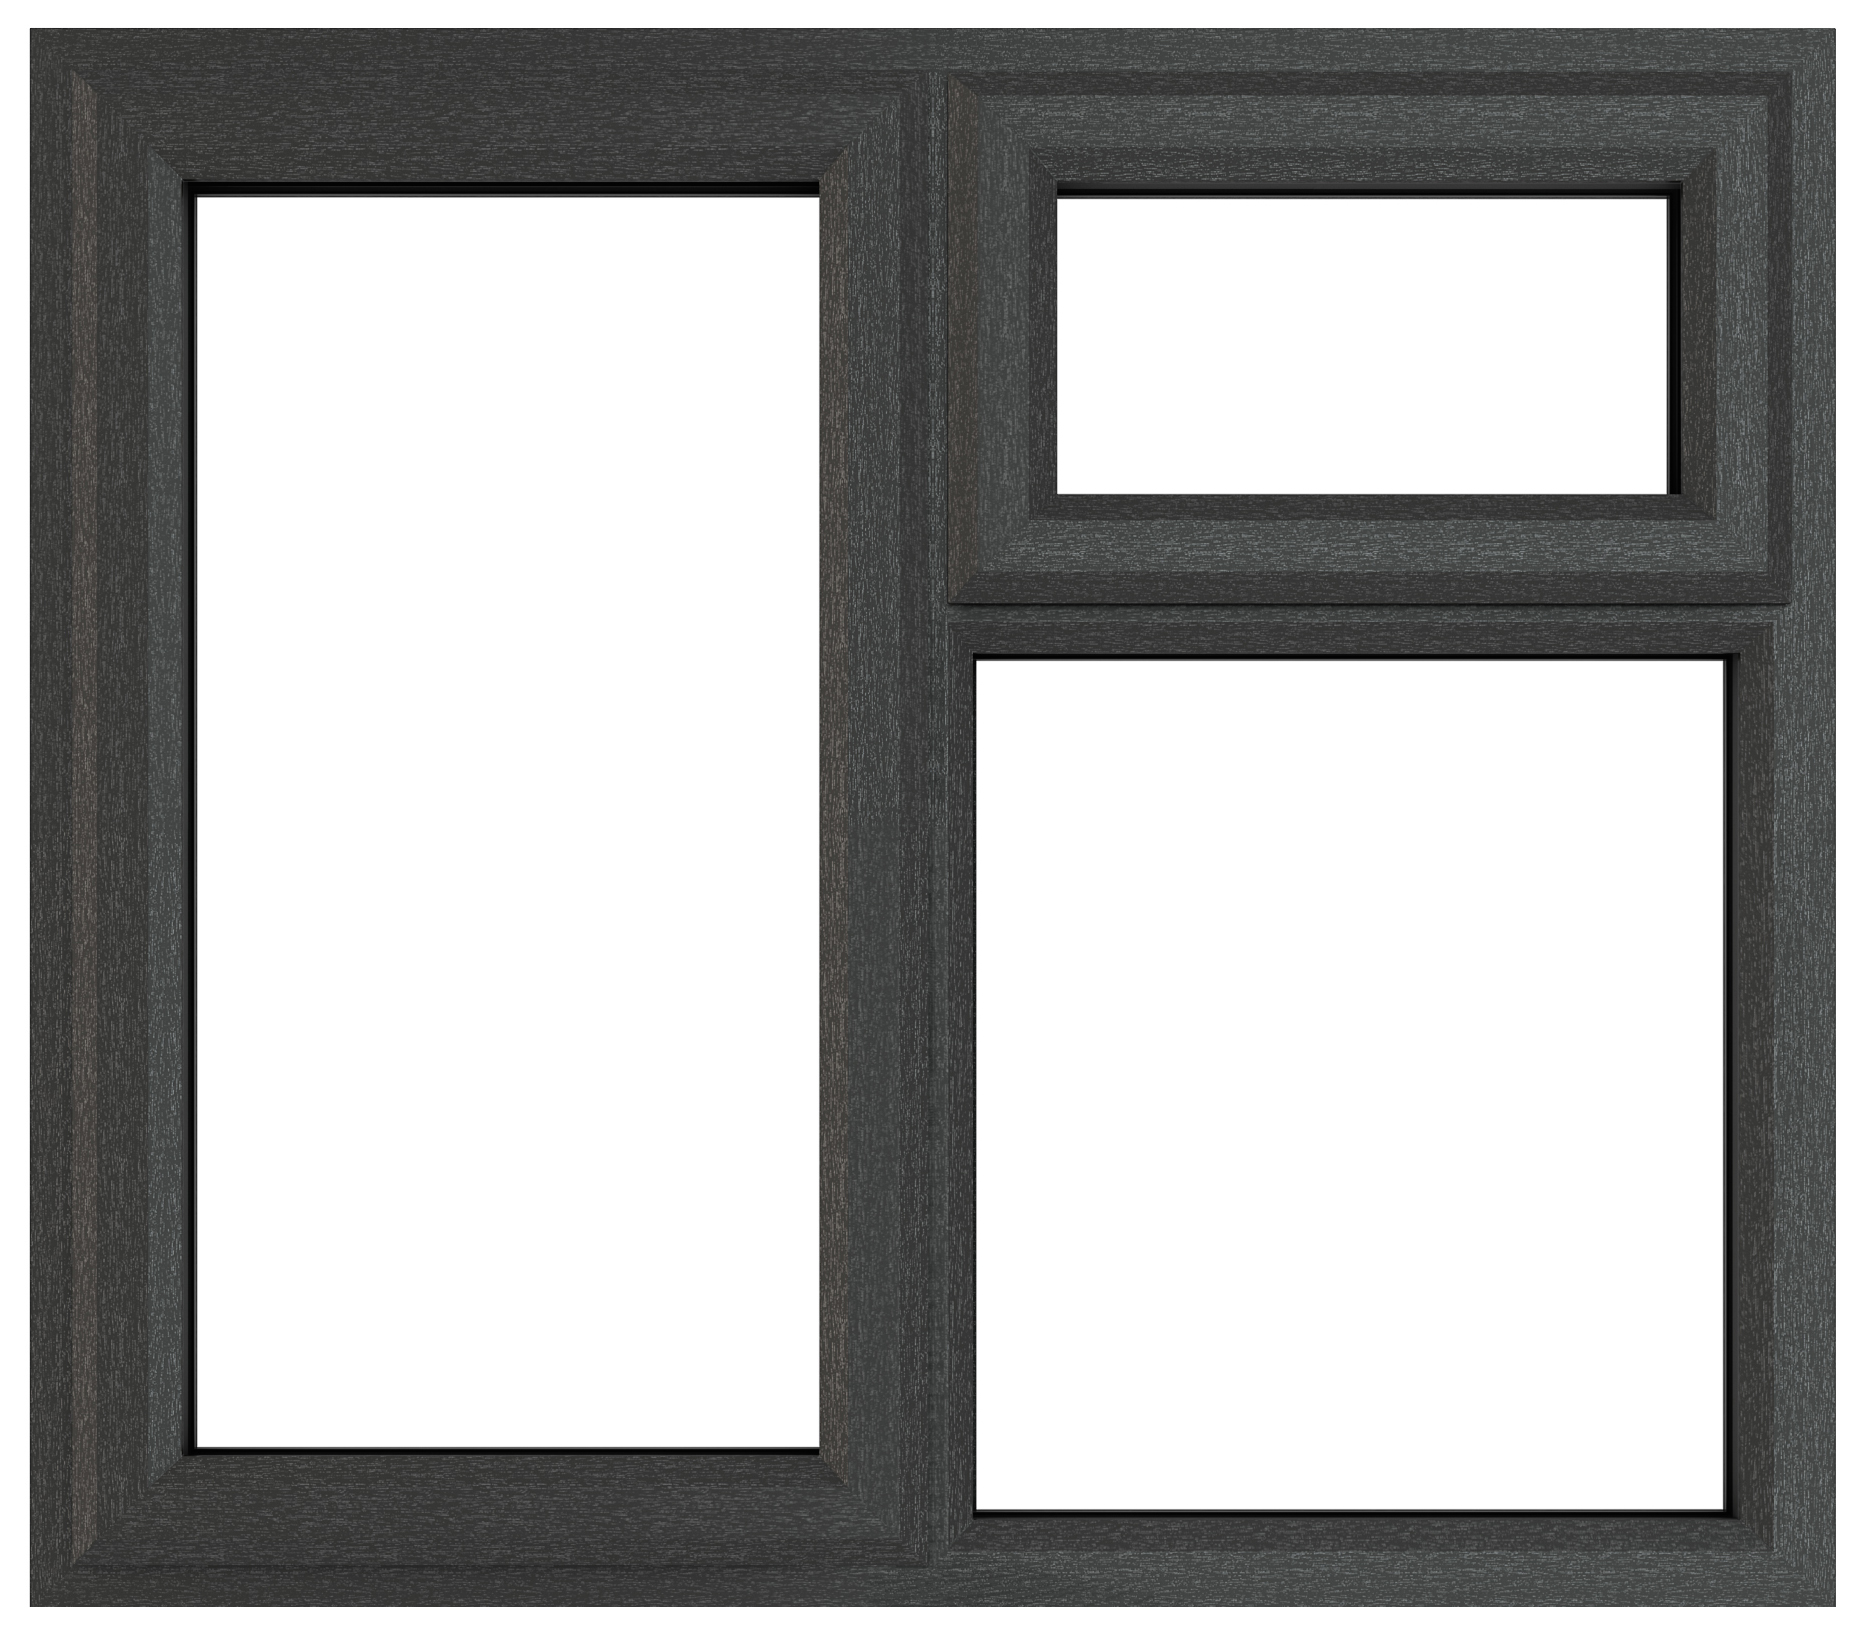 Crystal uPVC Grey Left Hung Top Opener Clear Double Glazed Fixed Light Window - 1190 x 965mm